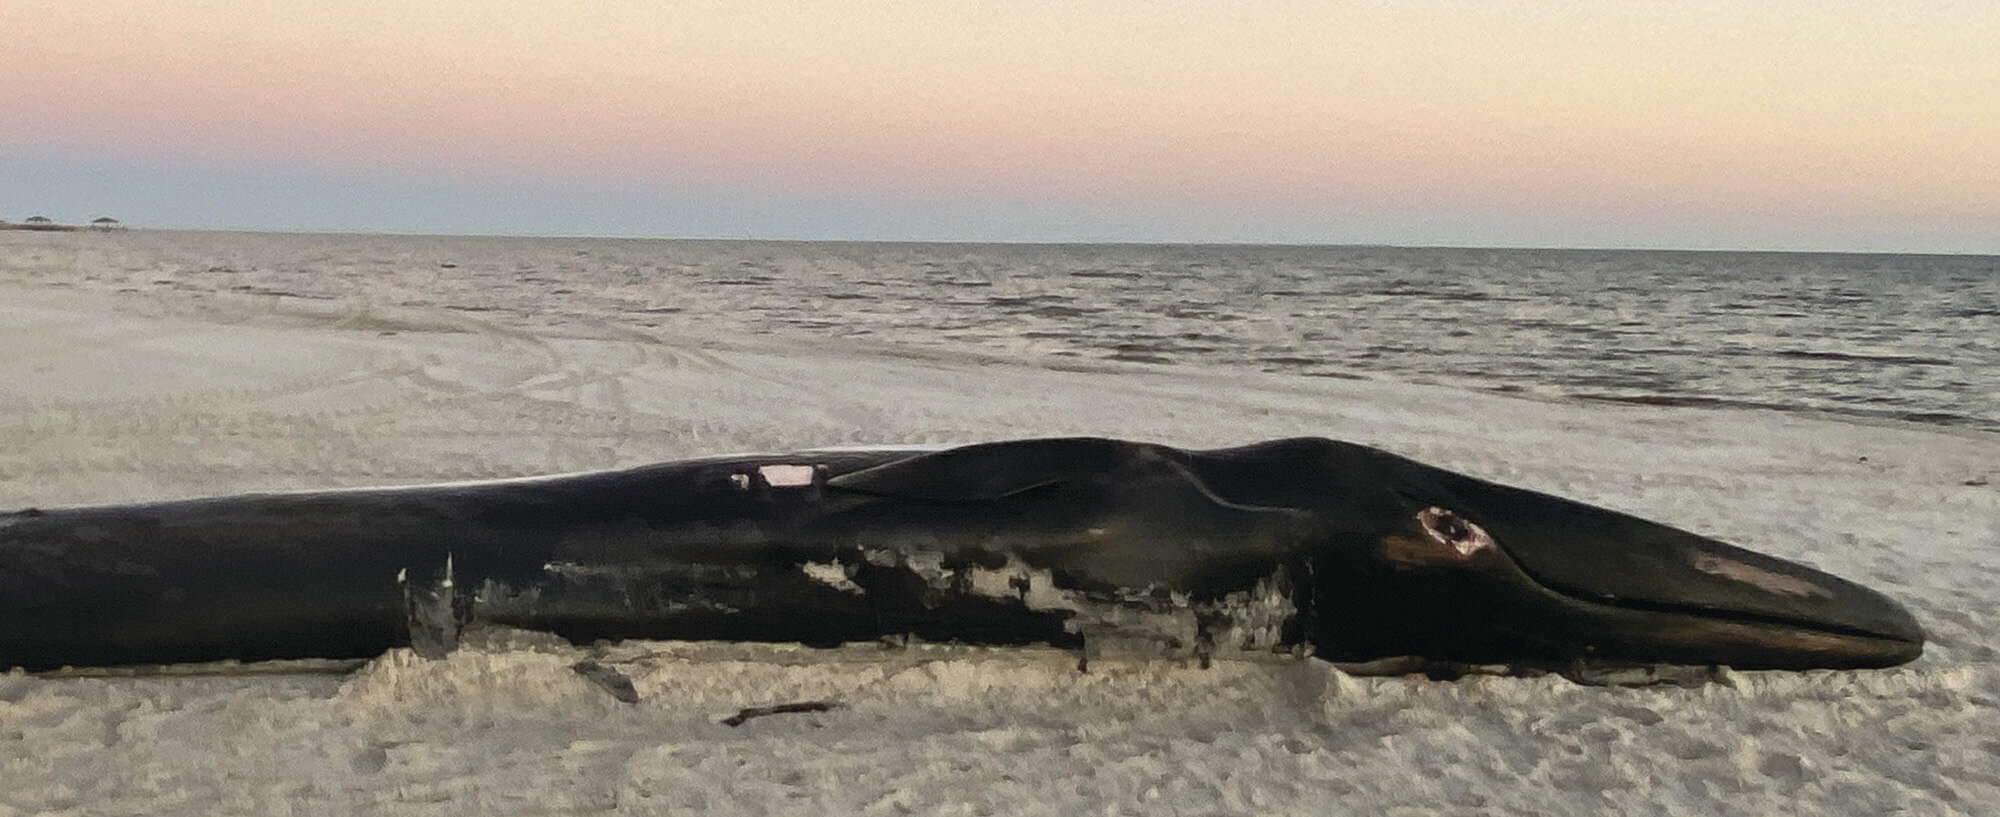 Dead endangered whale washes up on Mississippi Gulf Coast